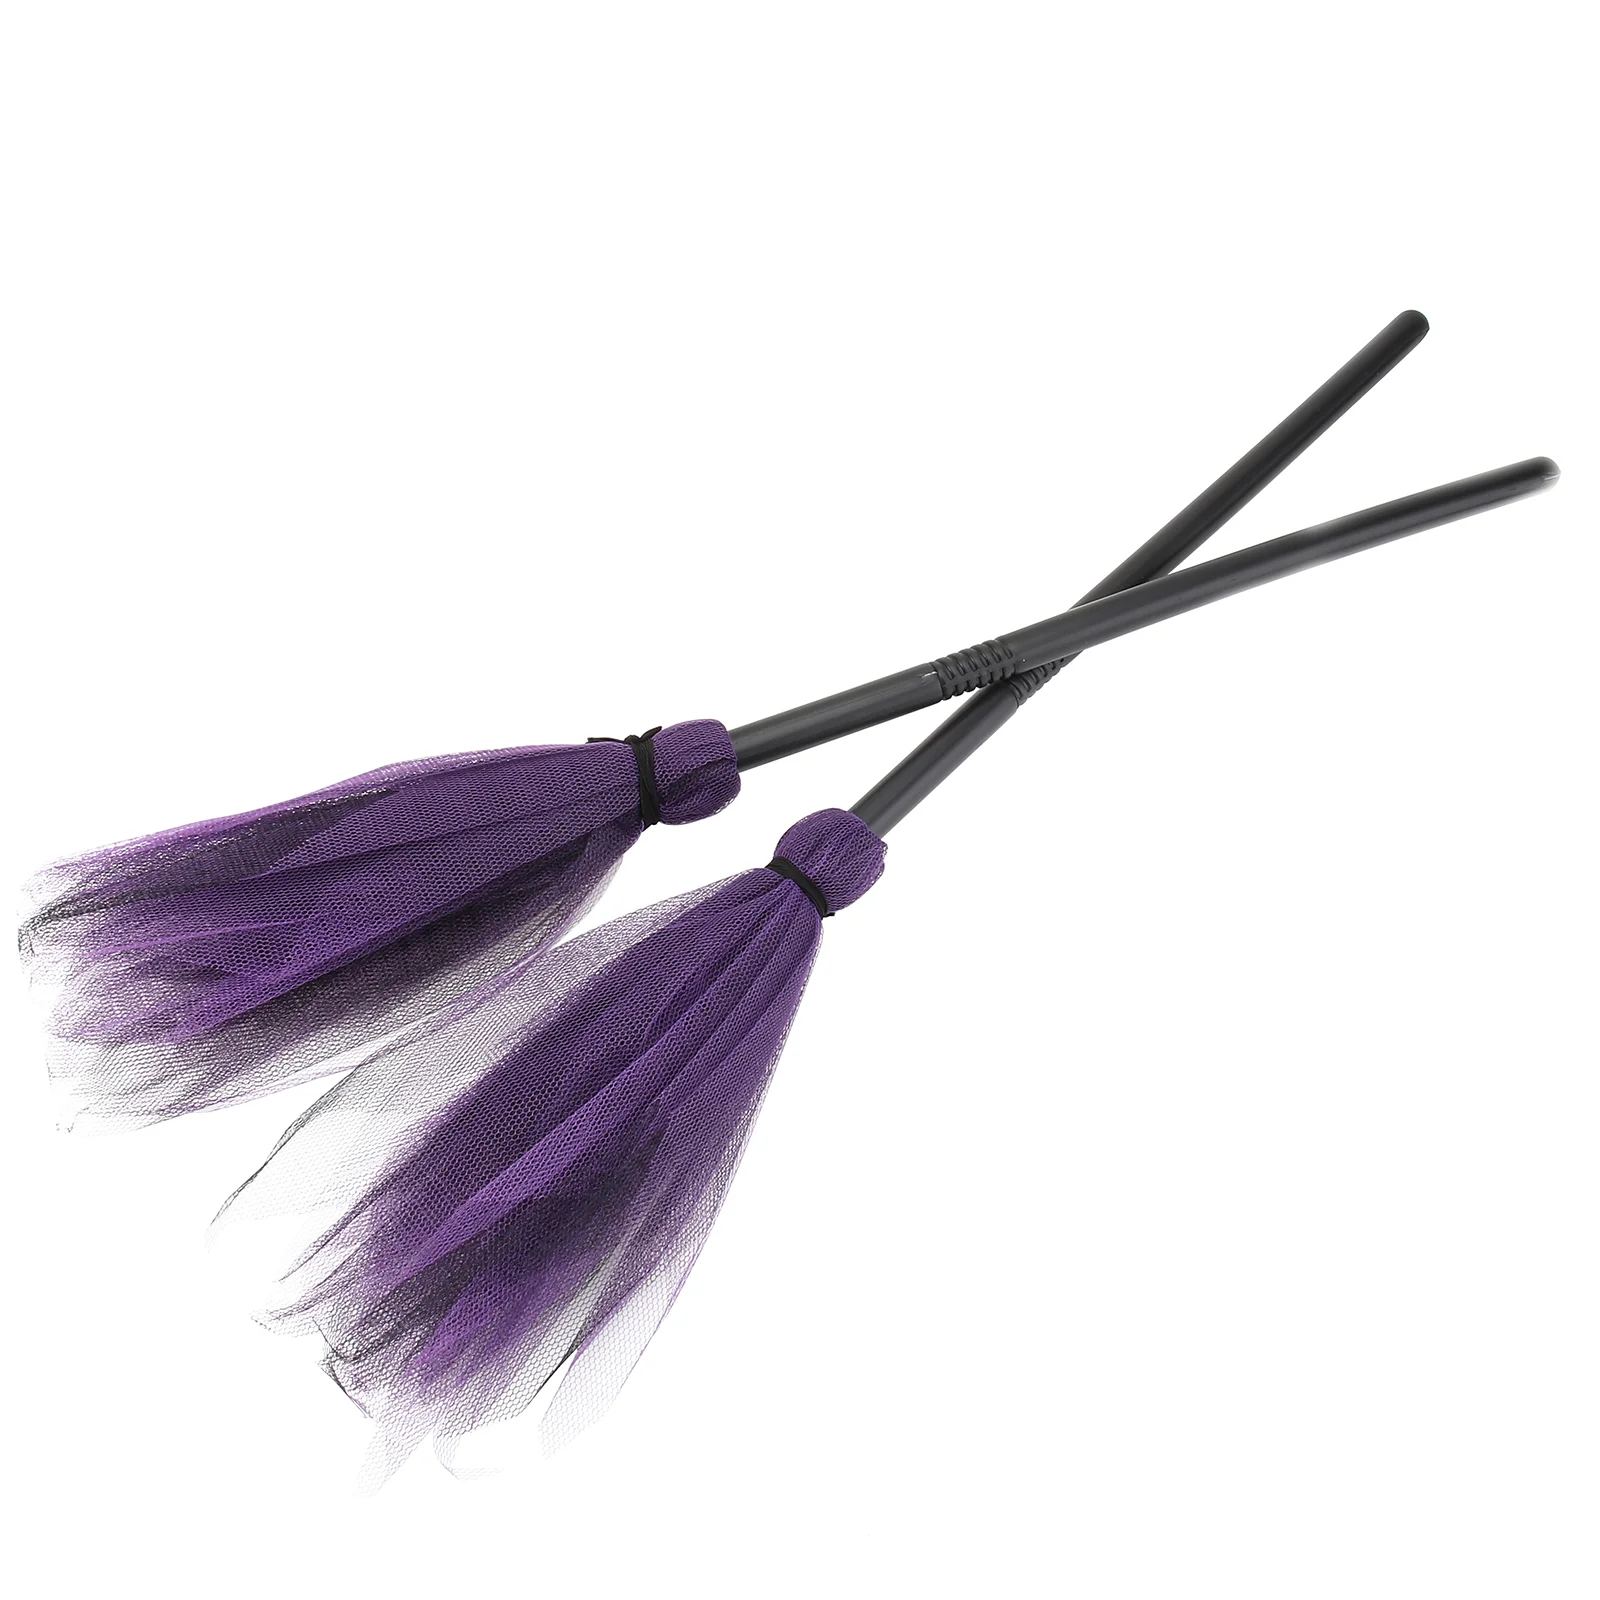 

Fomiyes Halloween Witch Broom Plastic Witch Broomstick Dress Up Costume Props Wicked Witches Broom Halloween Cosplay